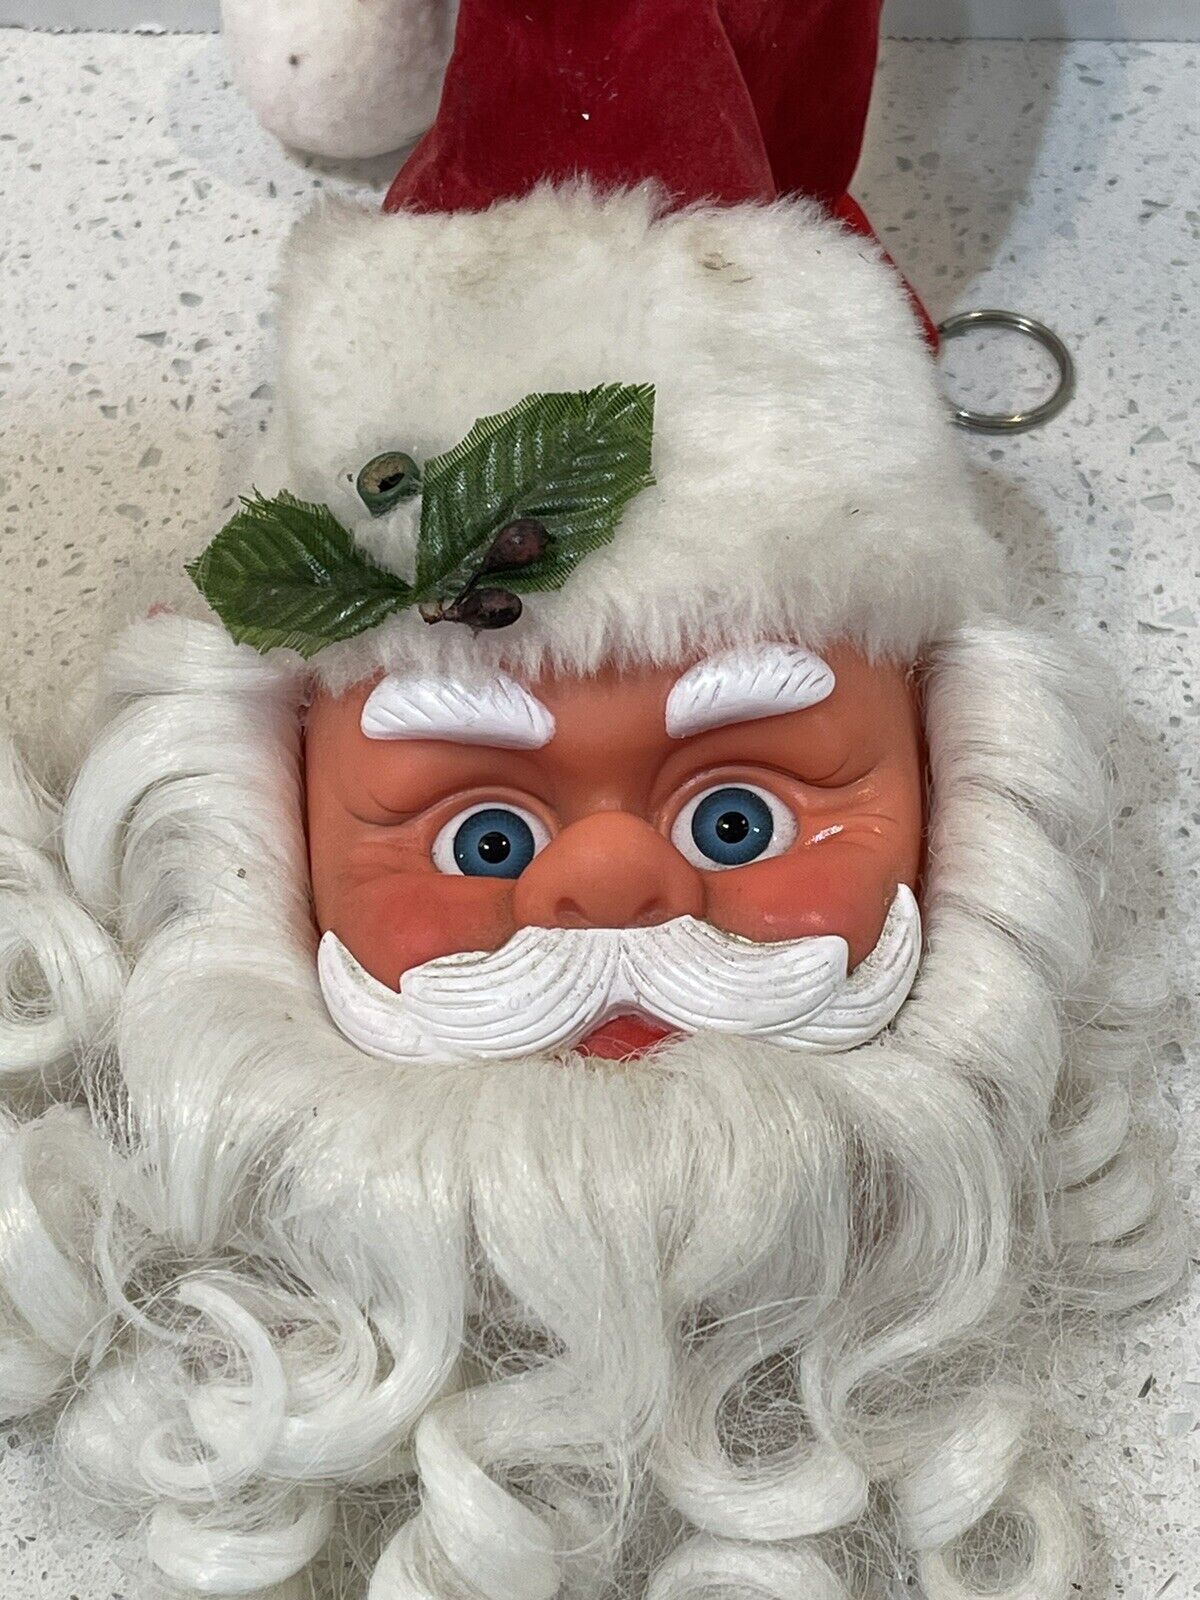 Vintage Hanging Santa Plays Different Sounds With Batteries